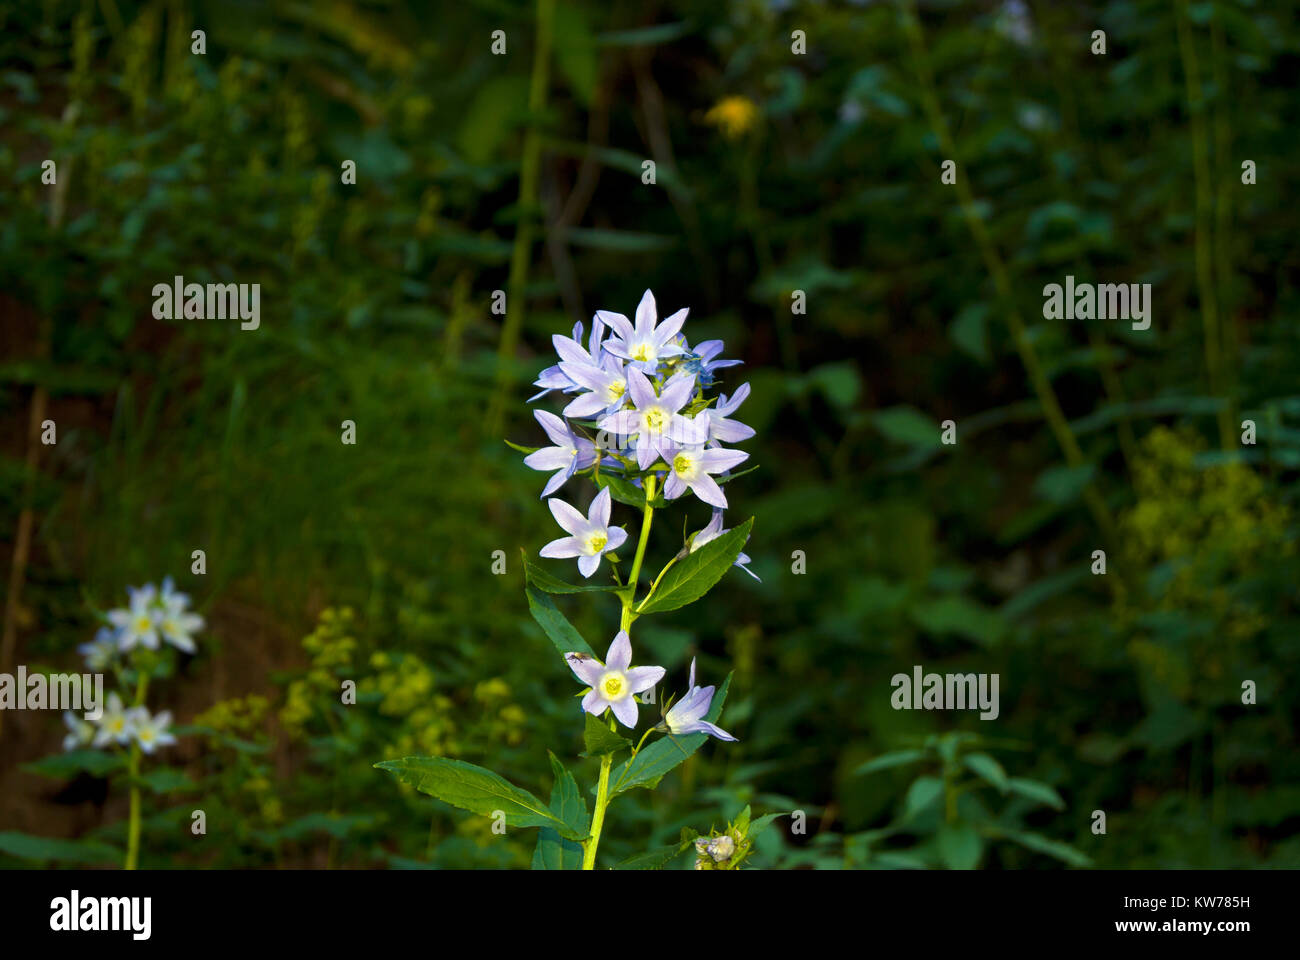 beautiful sunlit inflorescence of a bell closeup on a blurred dark forest background Stock Photo